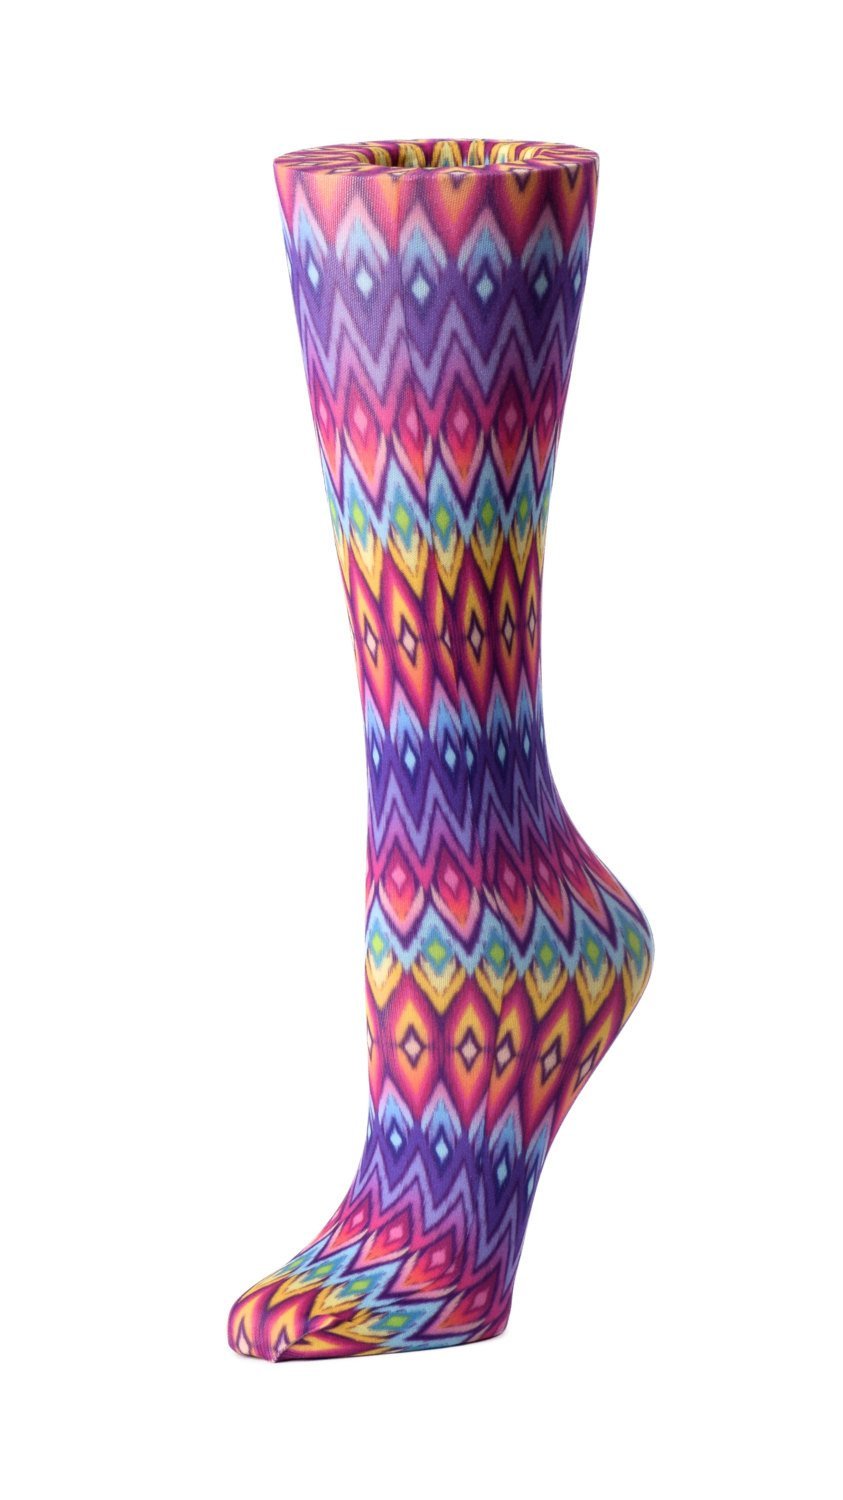 Cutieful Moderate Compression Socks 10-18 mmHg Knit in Print Patterns Rainbow Diamond at Parker's Clothing and Shoes.